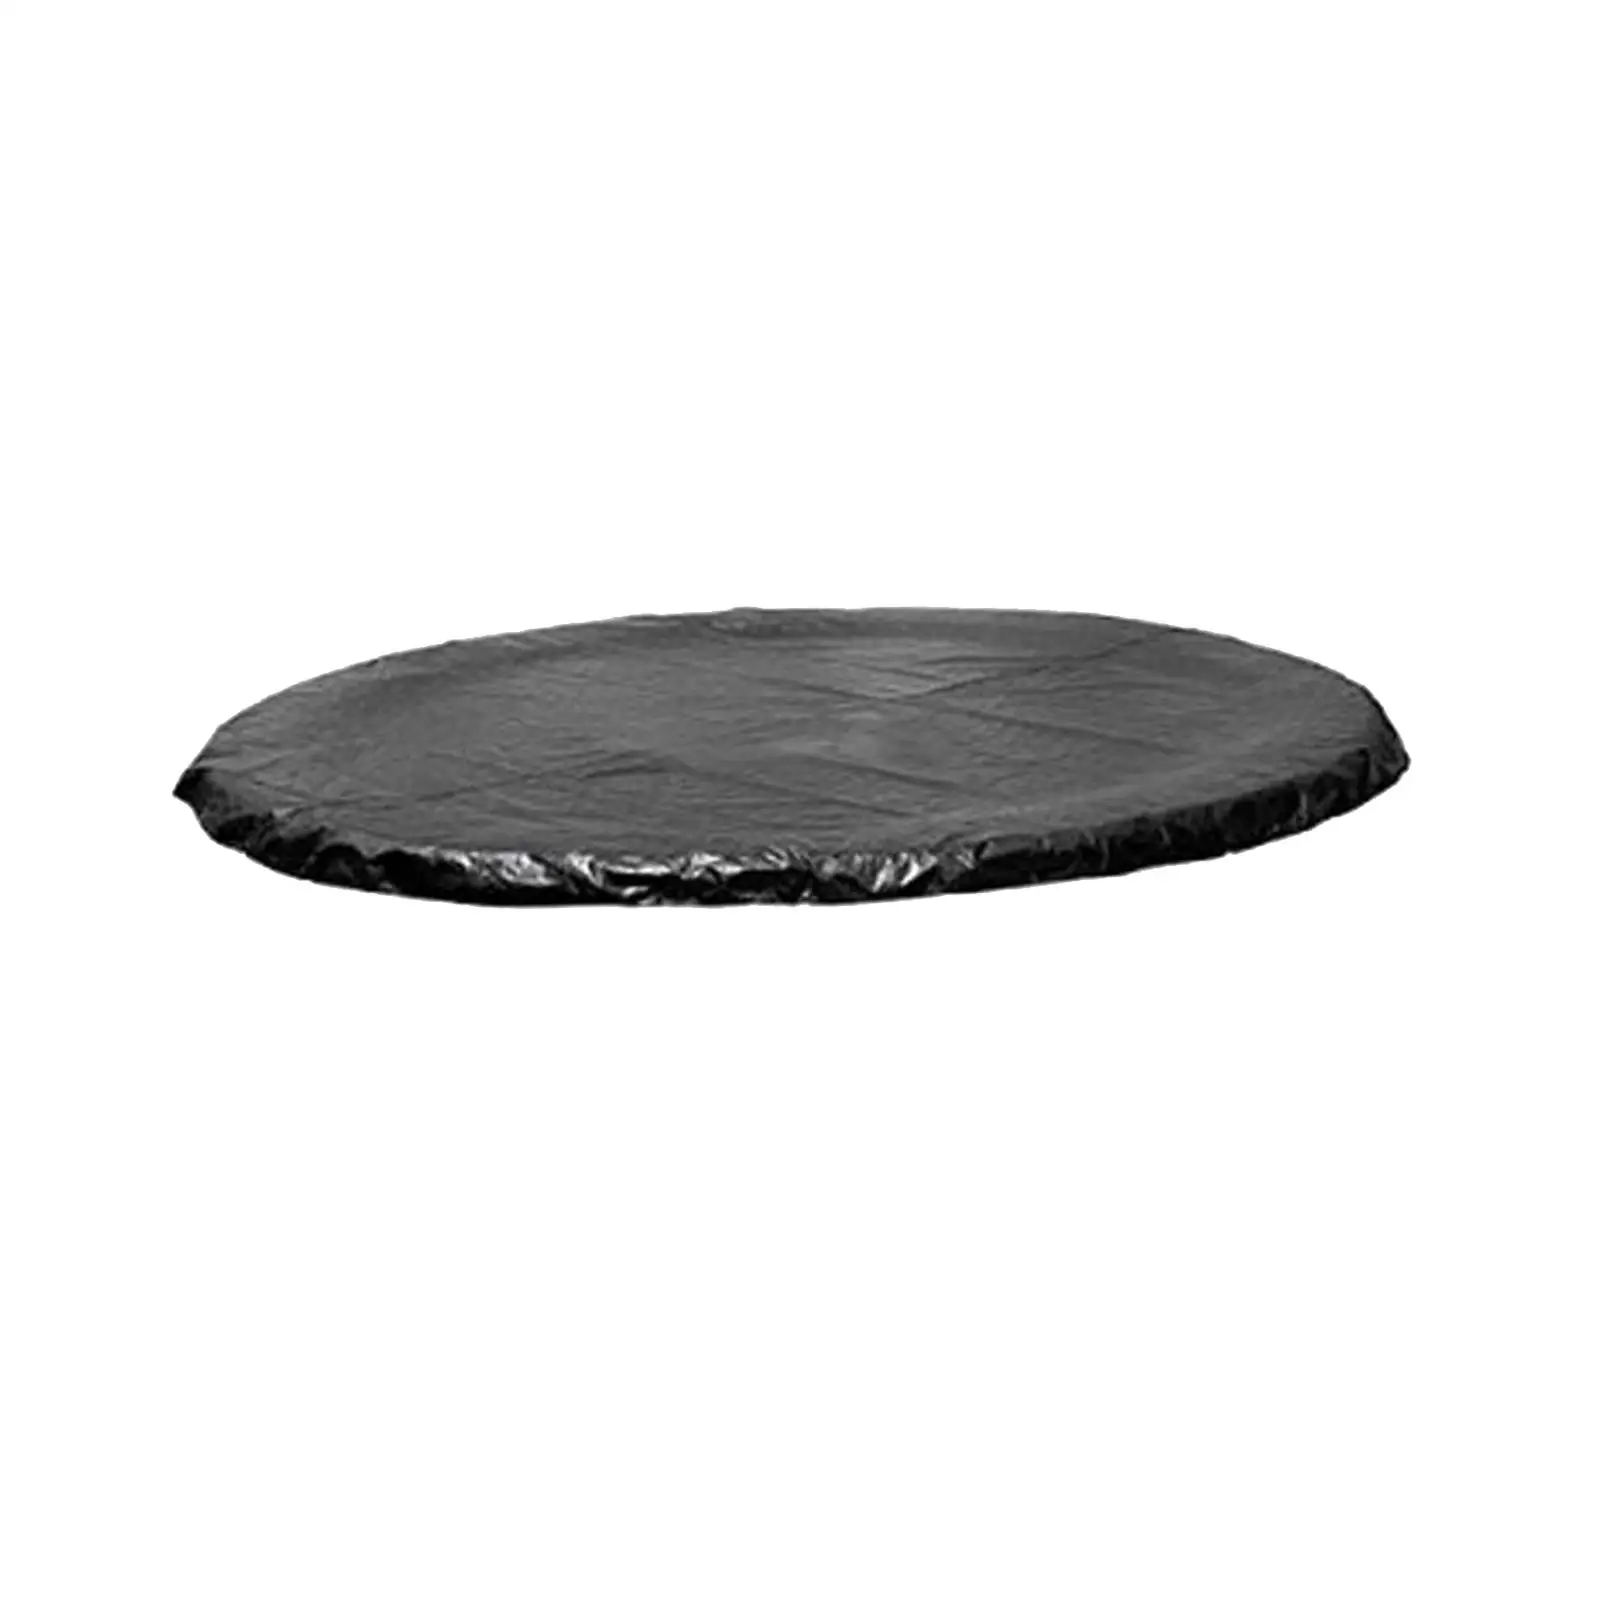 Black Trampoline Cover Weather and Rain Cover Durable Elastic Ropes Fixed Wear Resistant All Season Use Accessories Round